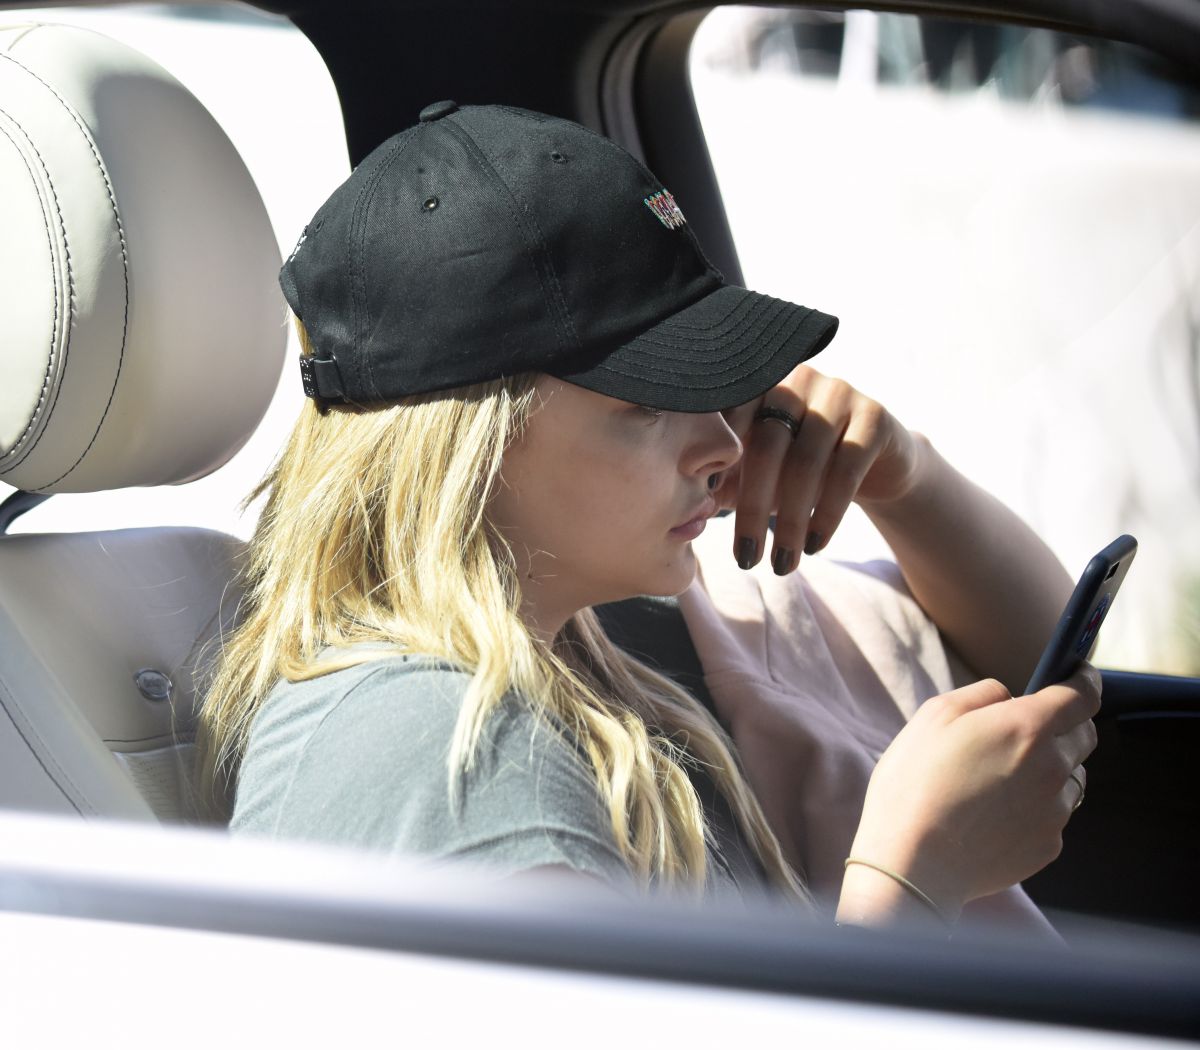 Chloe Moretz Chats Her Phone Near Her Home Los Angeles